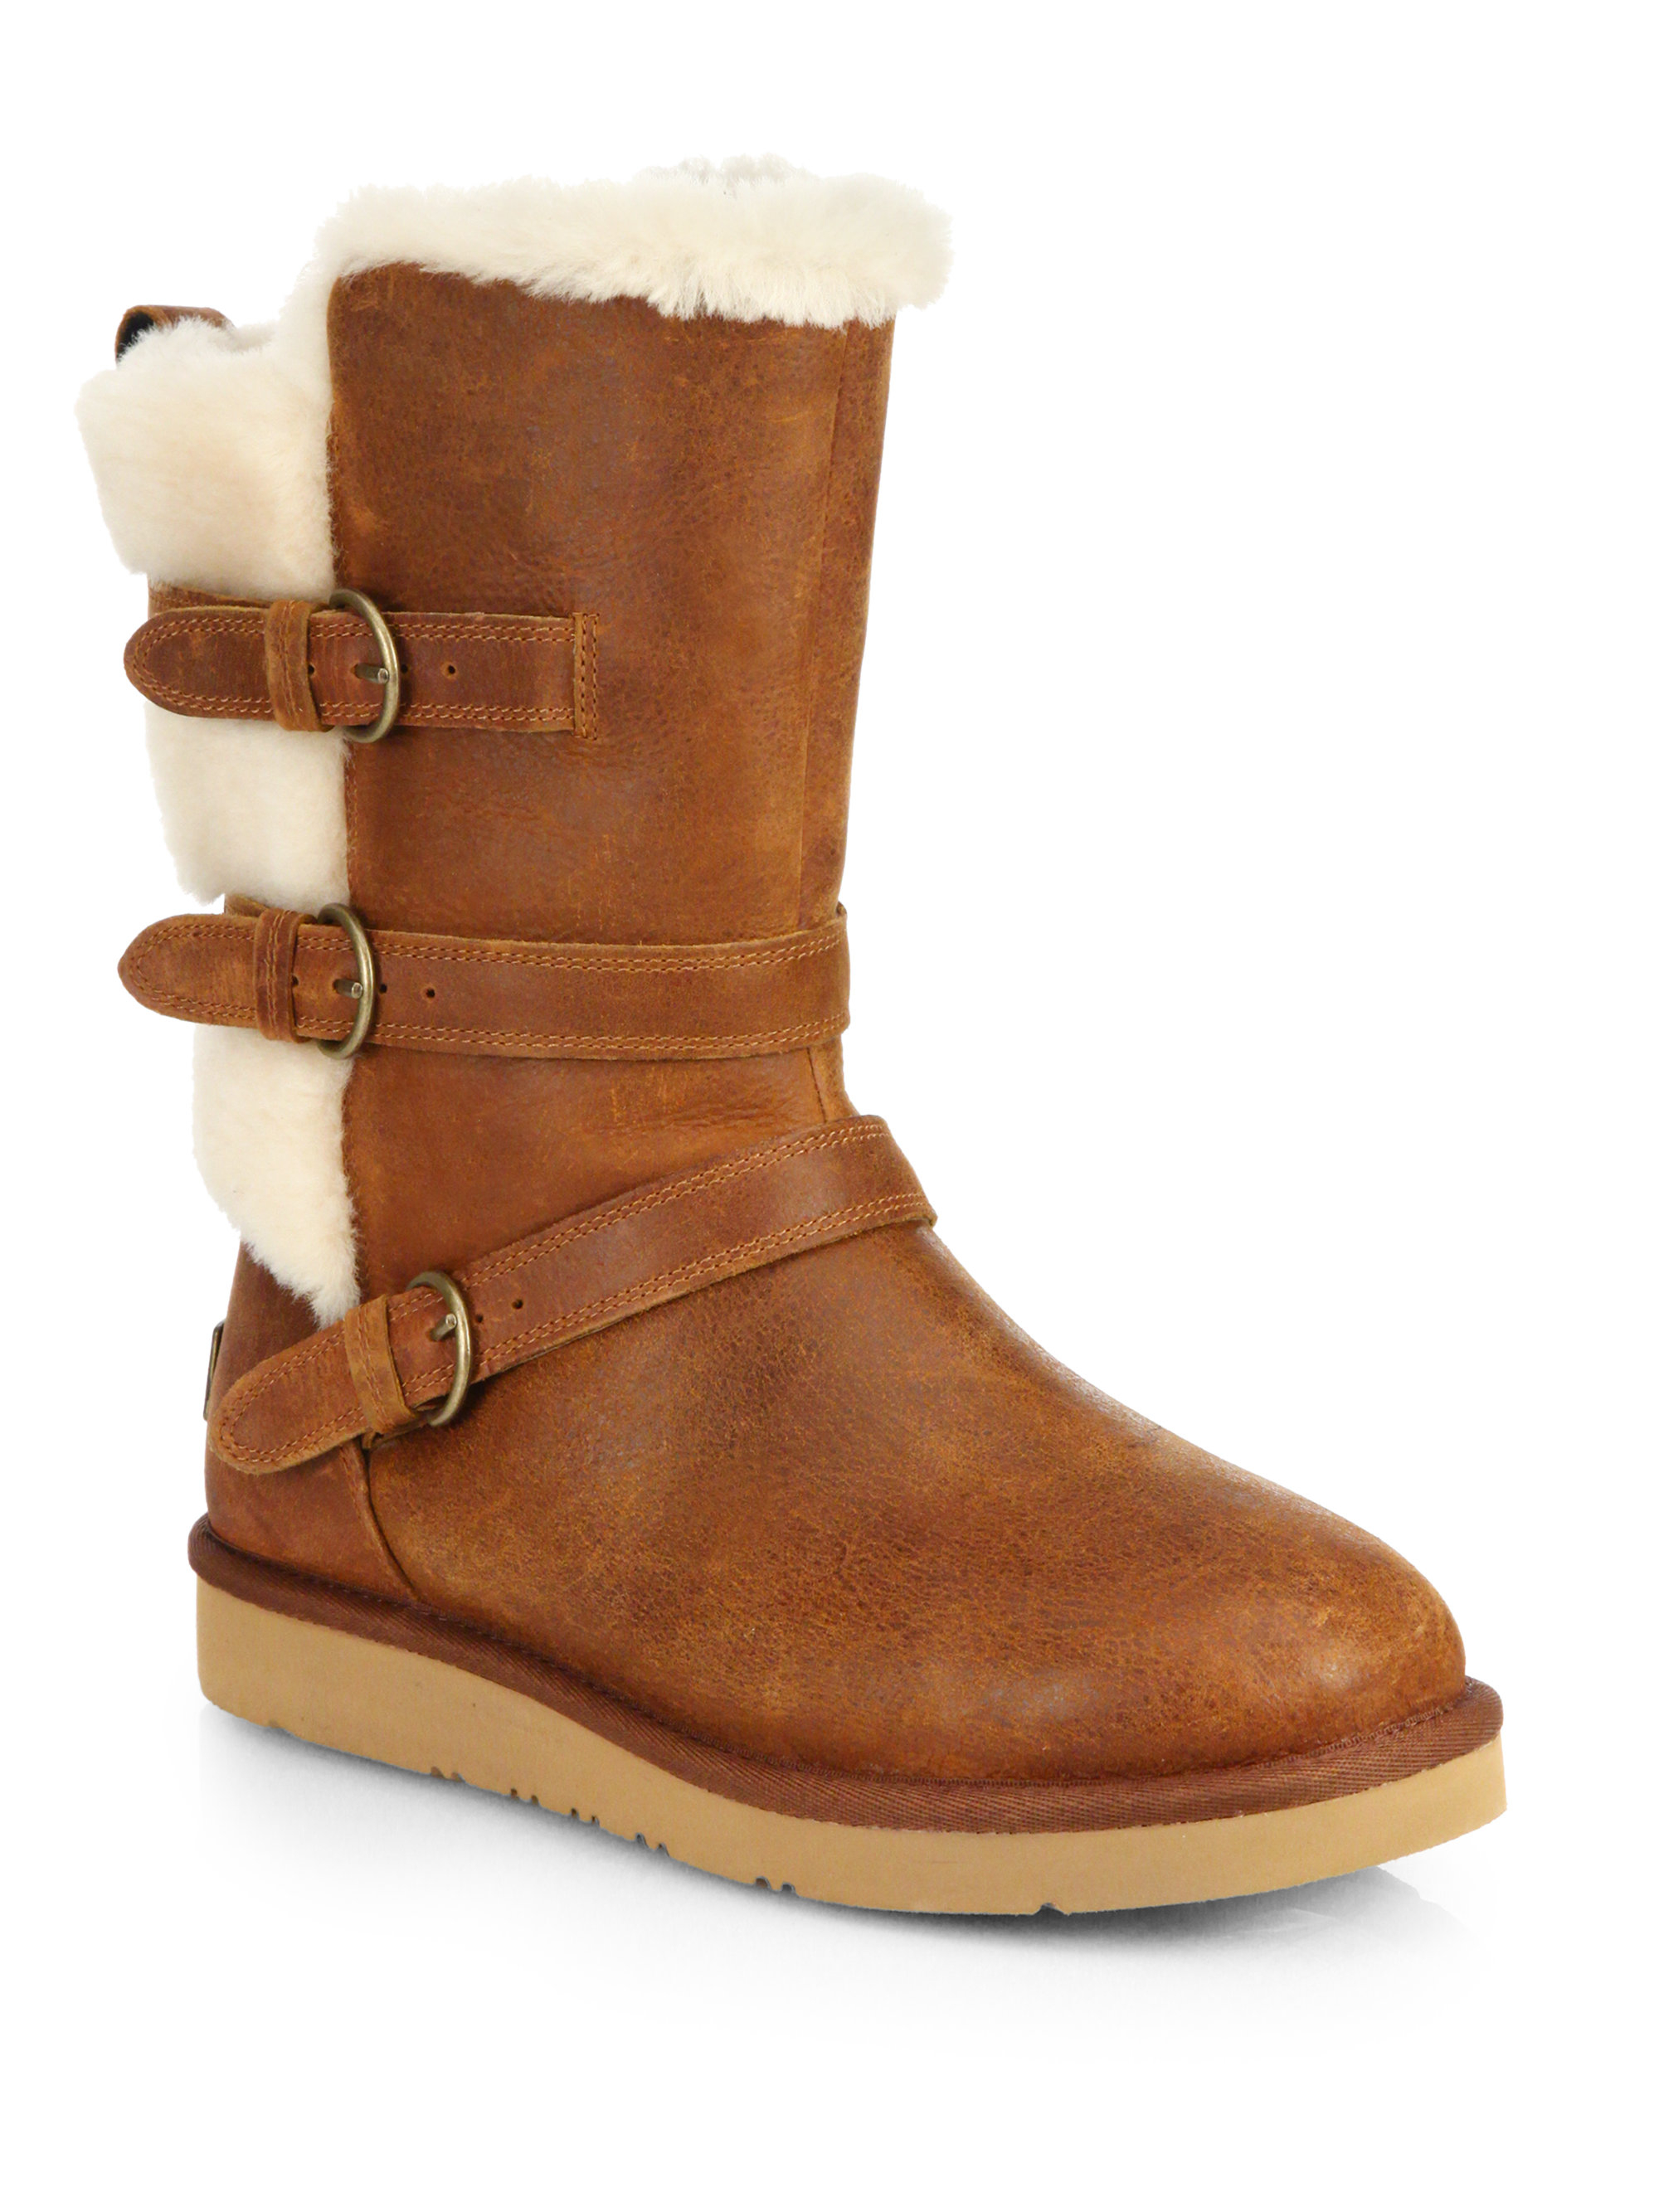 UGG Becket Leather Mid-Calf Boots in Chestnut (Brown) - Lyst